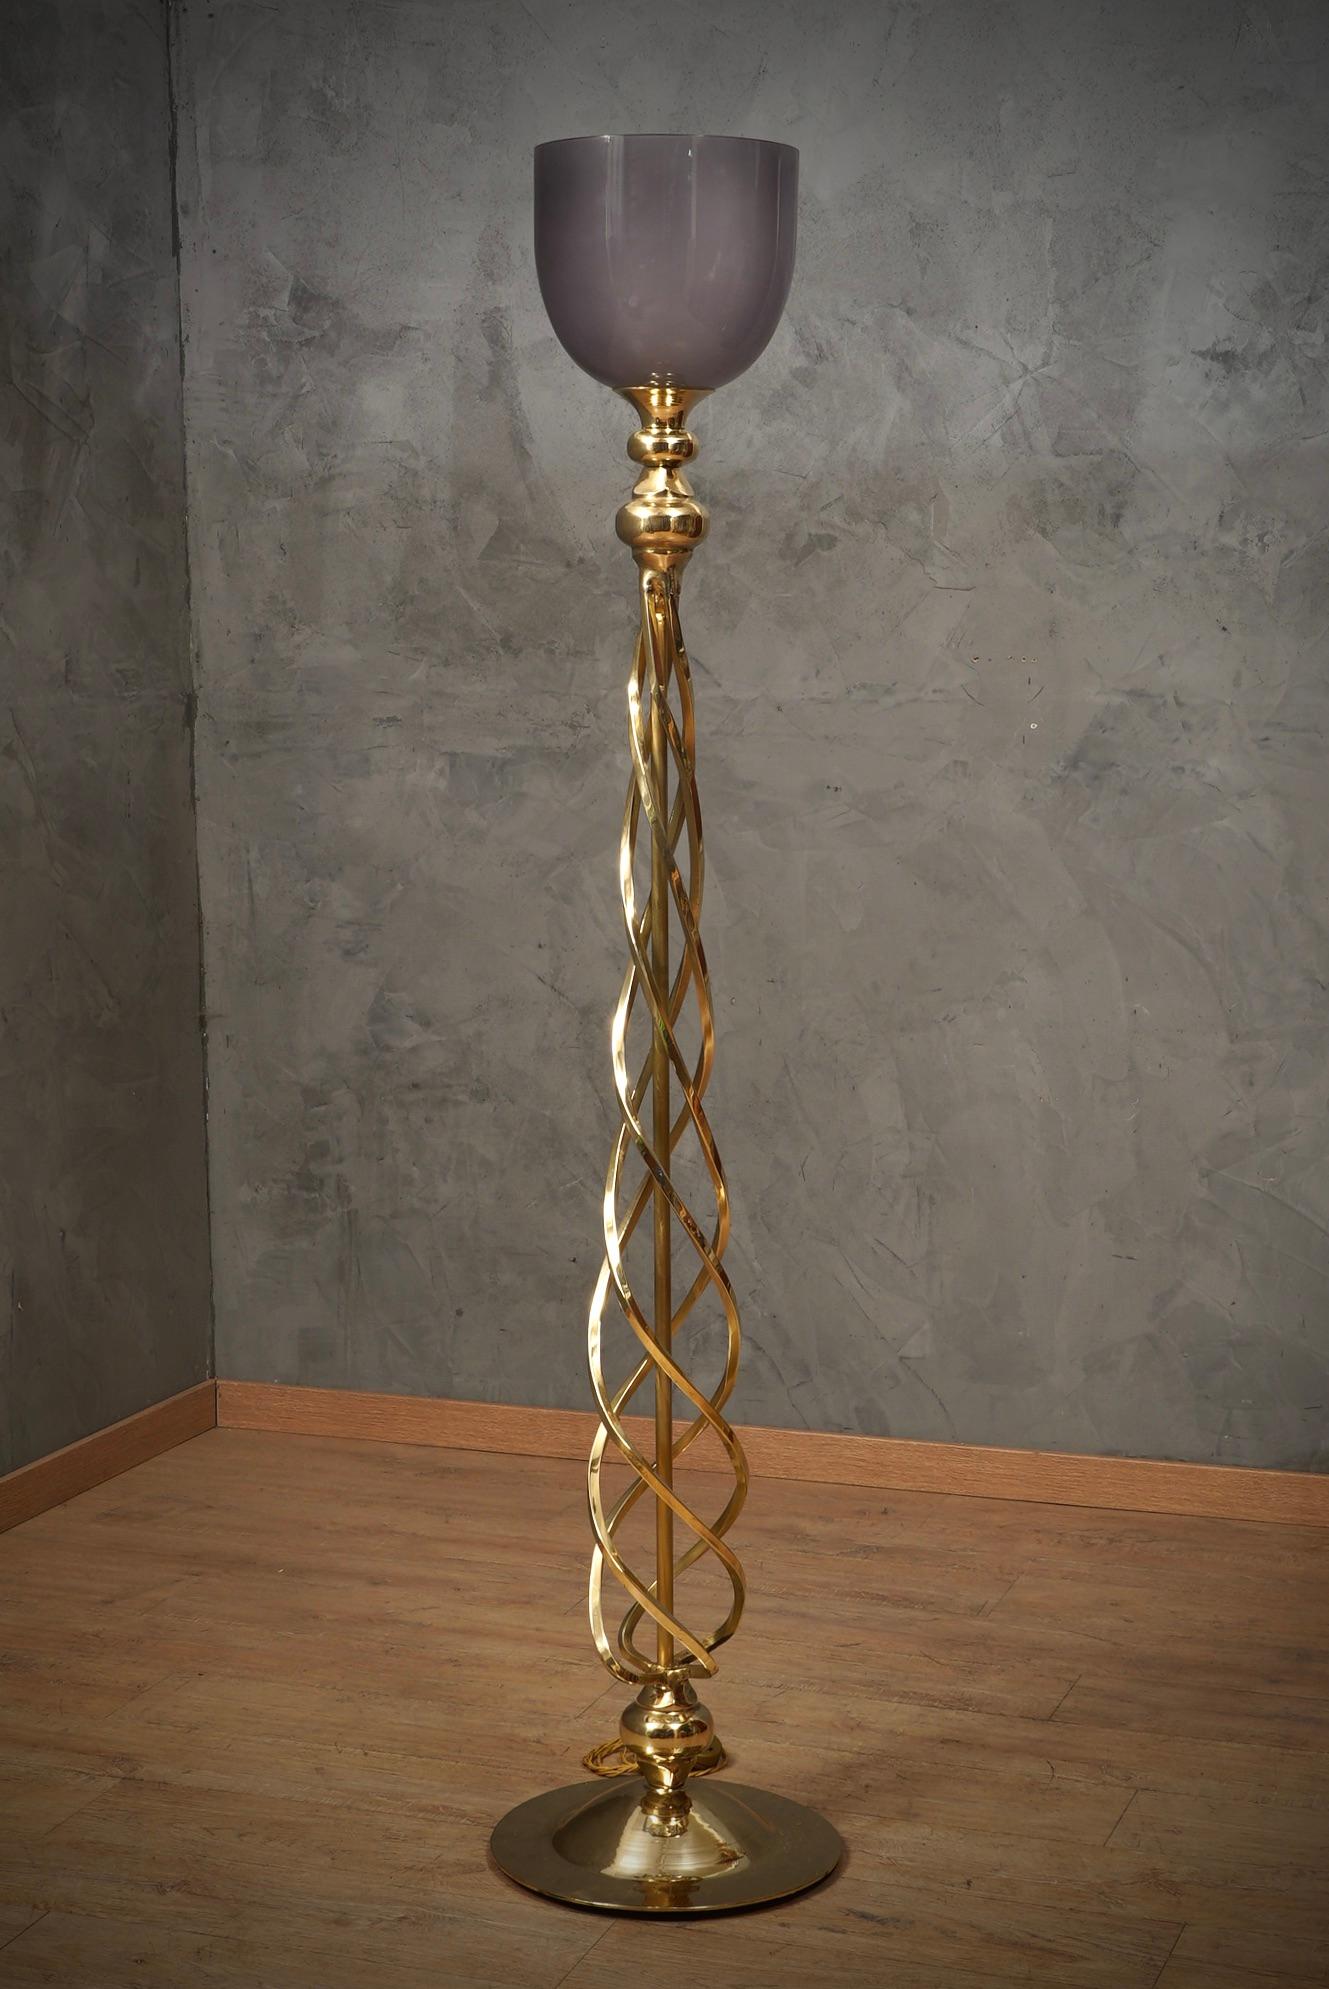 Exquisite lighting that exemplifies timeless design and exceptional craftsmanship. The floor lamp is very linear and will perfectly furnish your home space. Aesthetically the floor lamp as a whole is wonderful. Meticulous and detailed workmanship